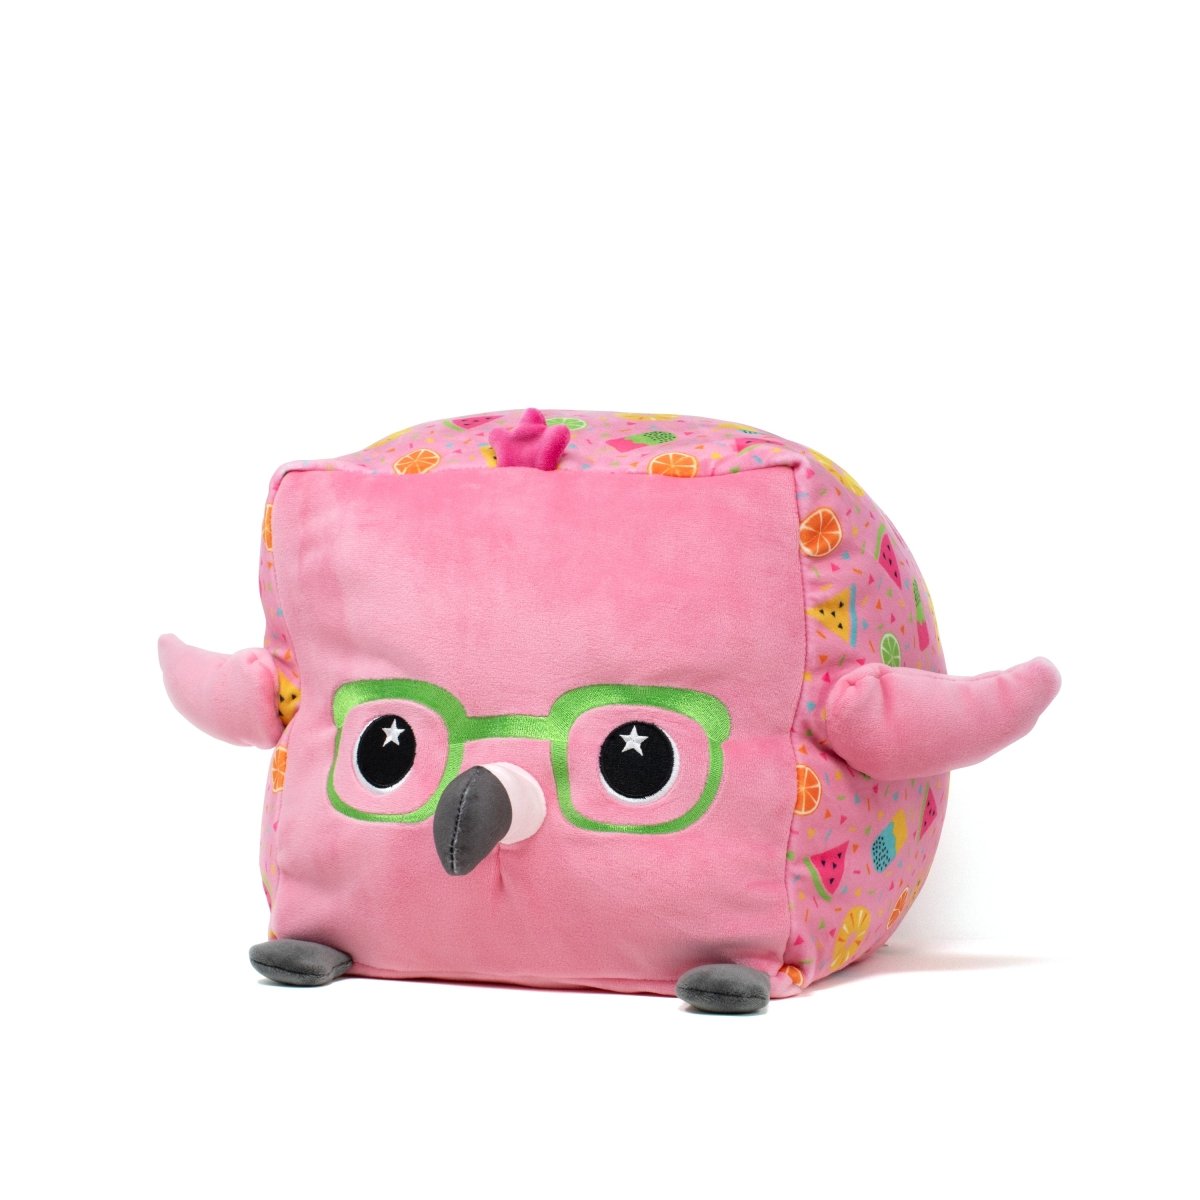 Pippin the Flamingo plush toy with bright pink feathers and green glasses from Moosh-Moosh SQUARED² Collection.